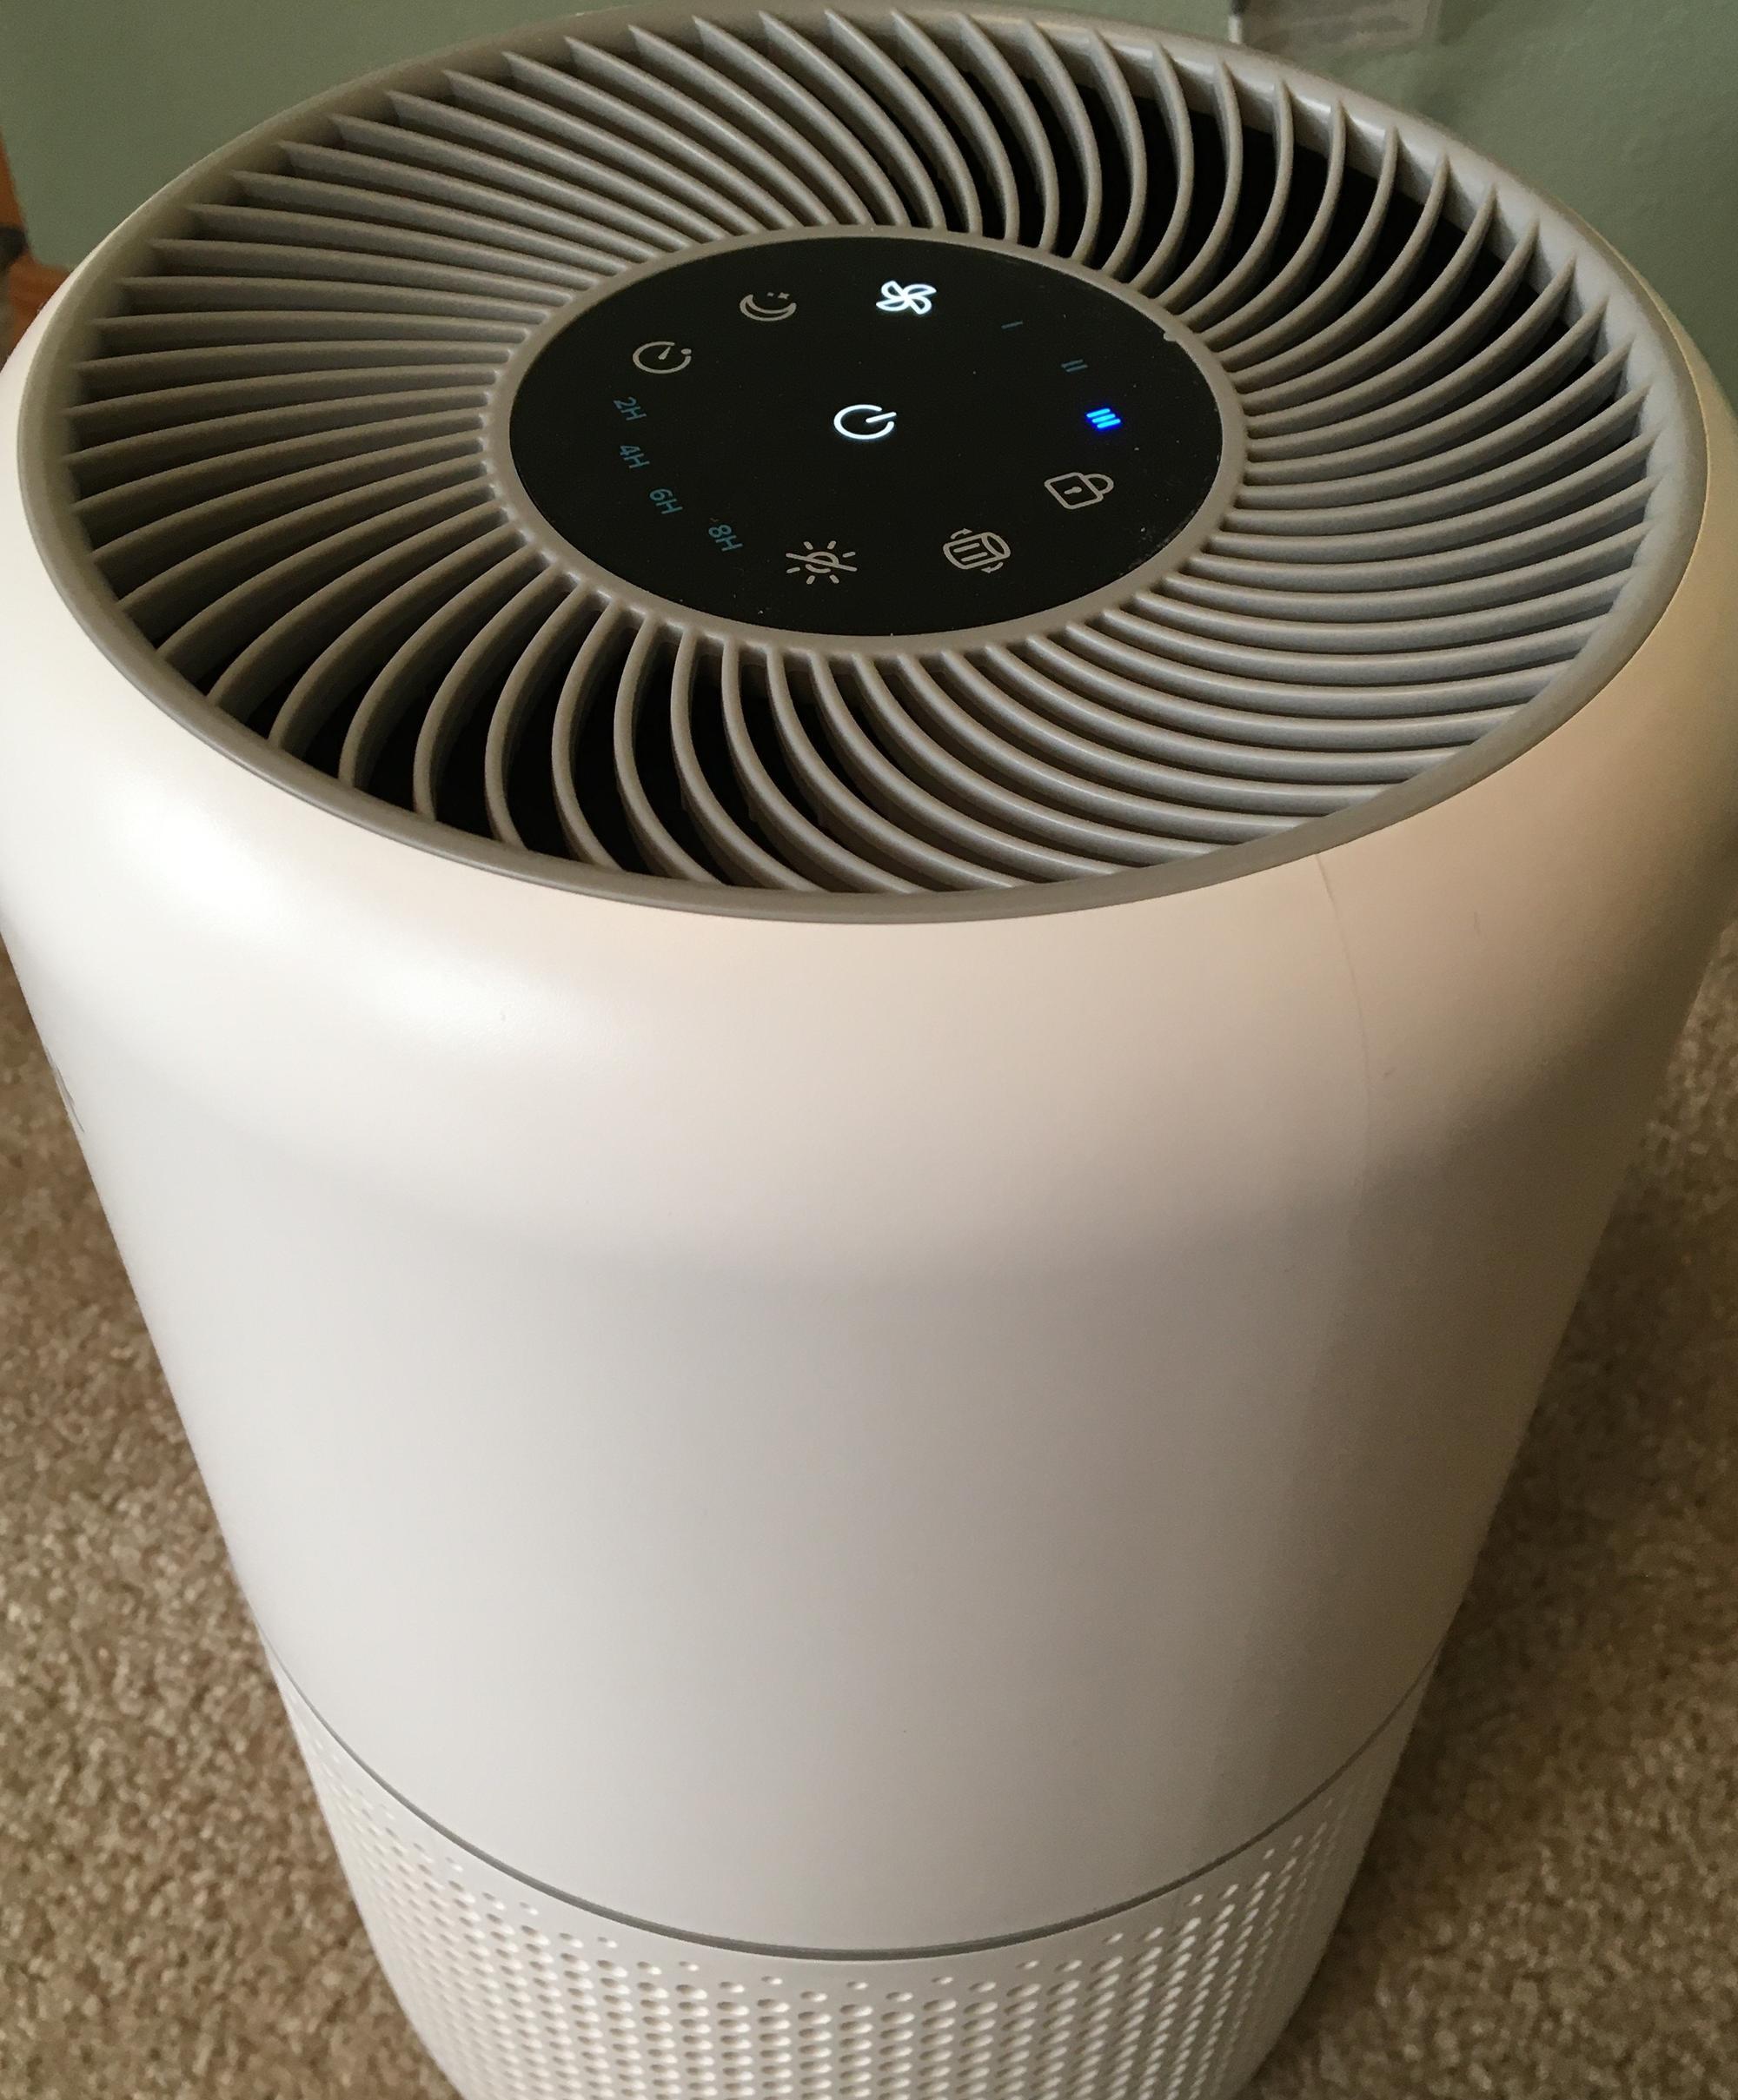 Portable indoor air cleaner shown operating at highest speed